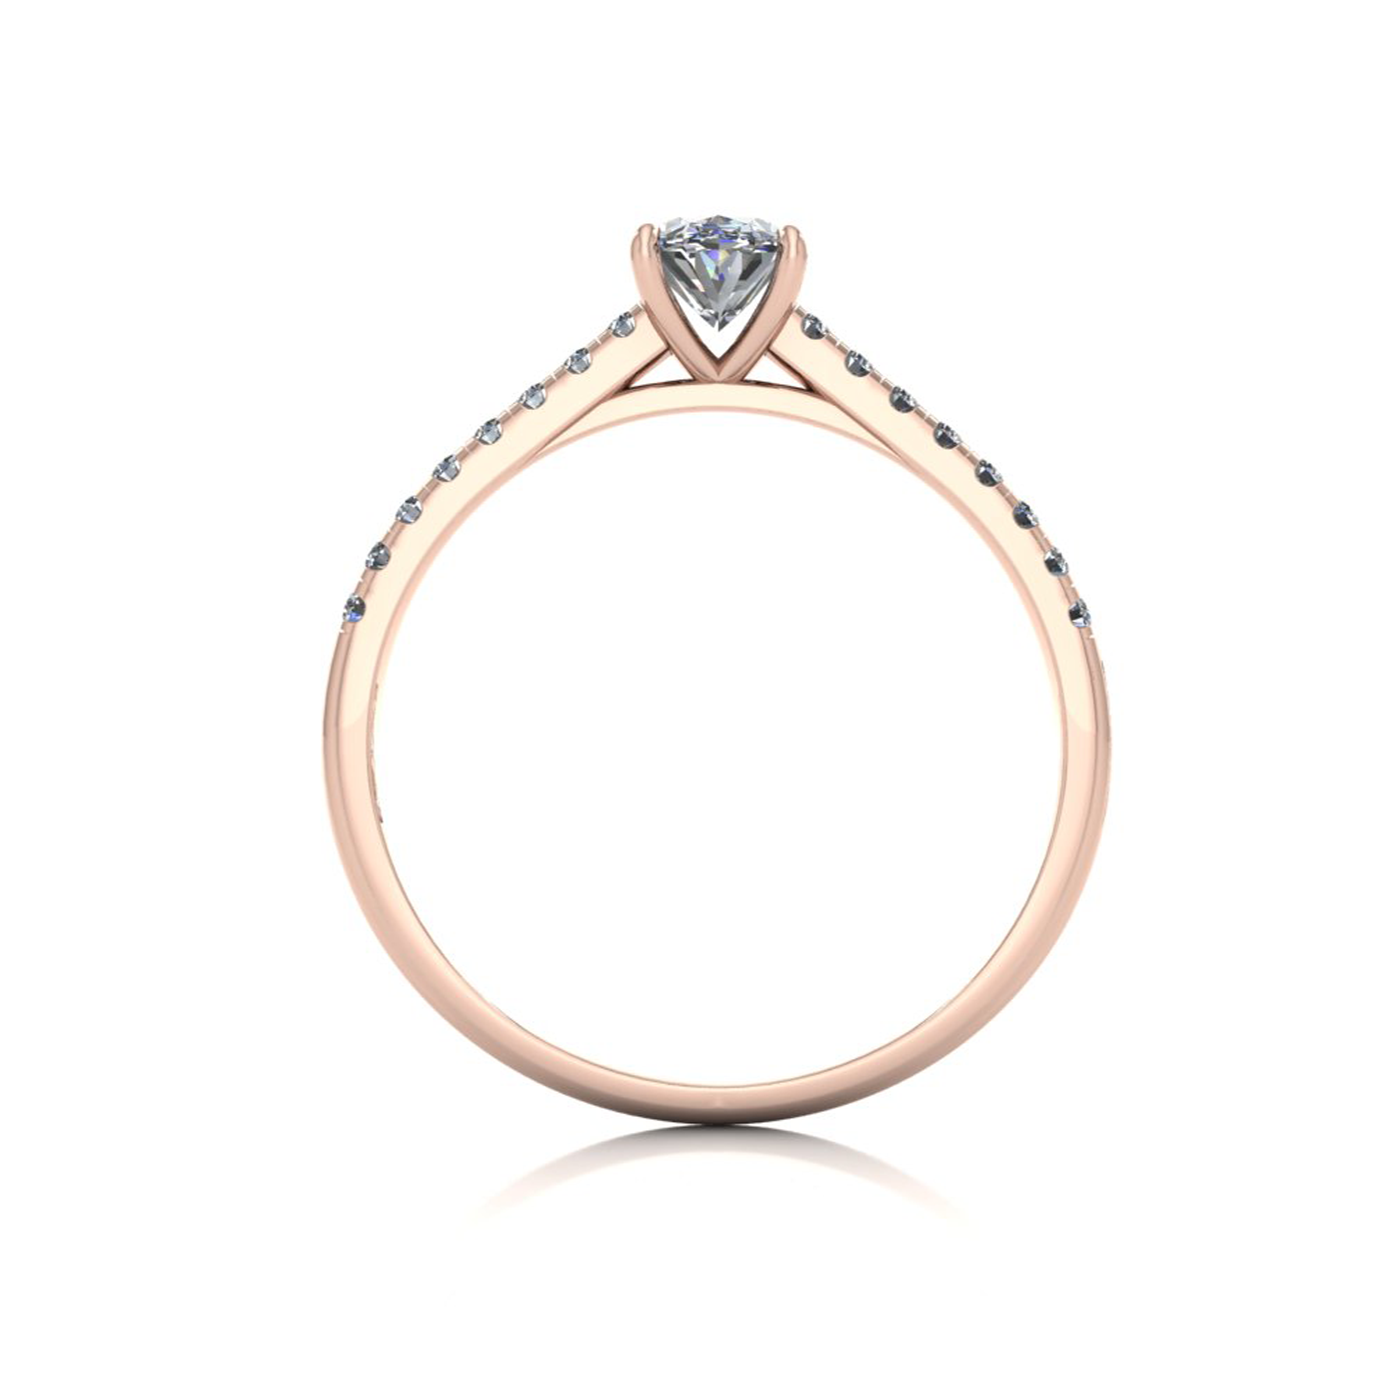 18k rose gold  0,50 ct 4 prongs oval cut diamond engagement ring with whisper thin pavÉ set band